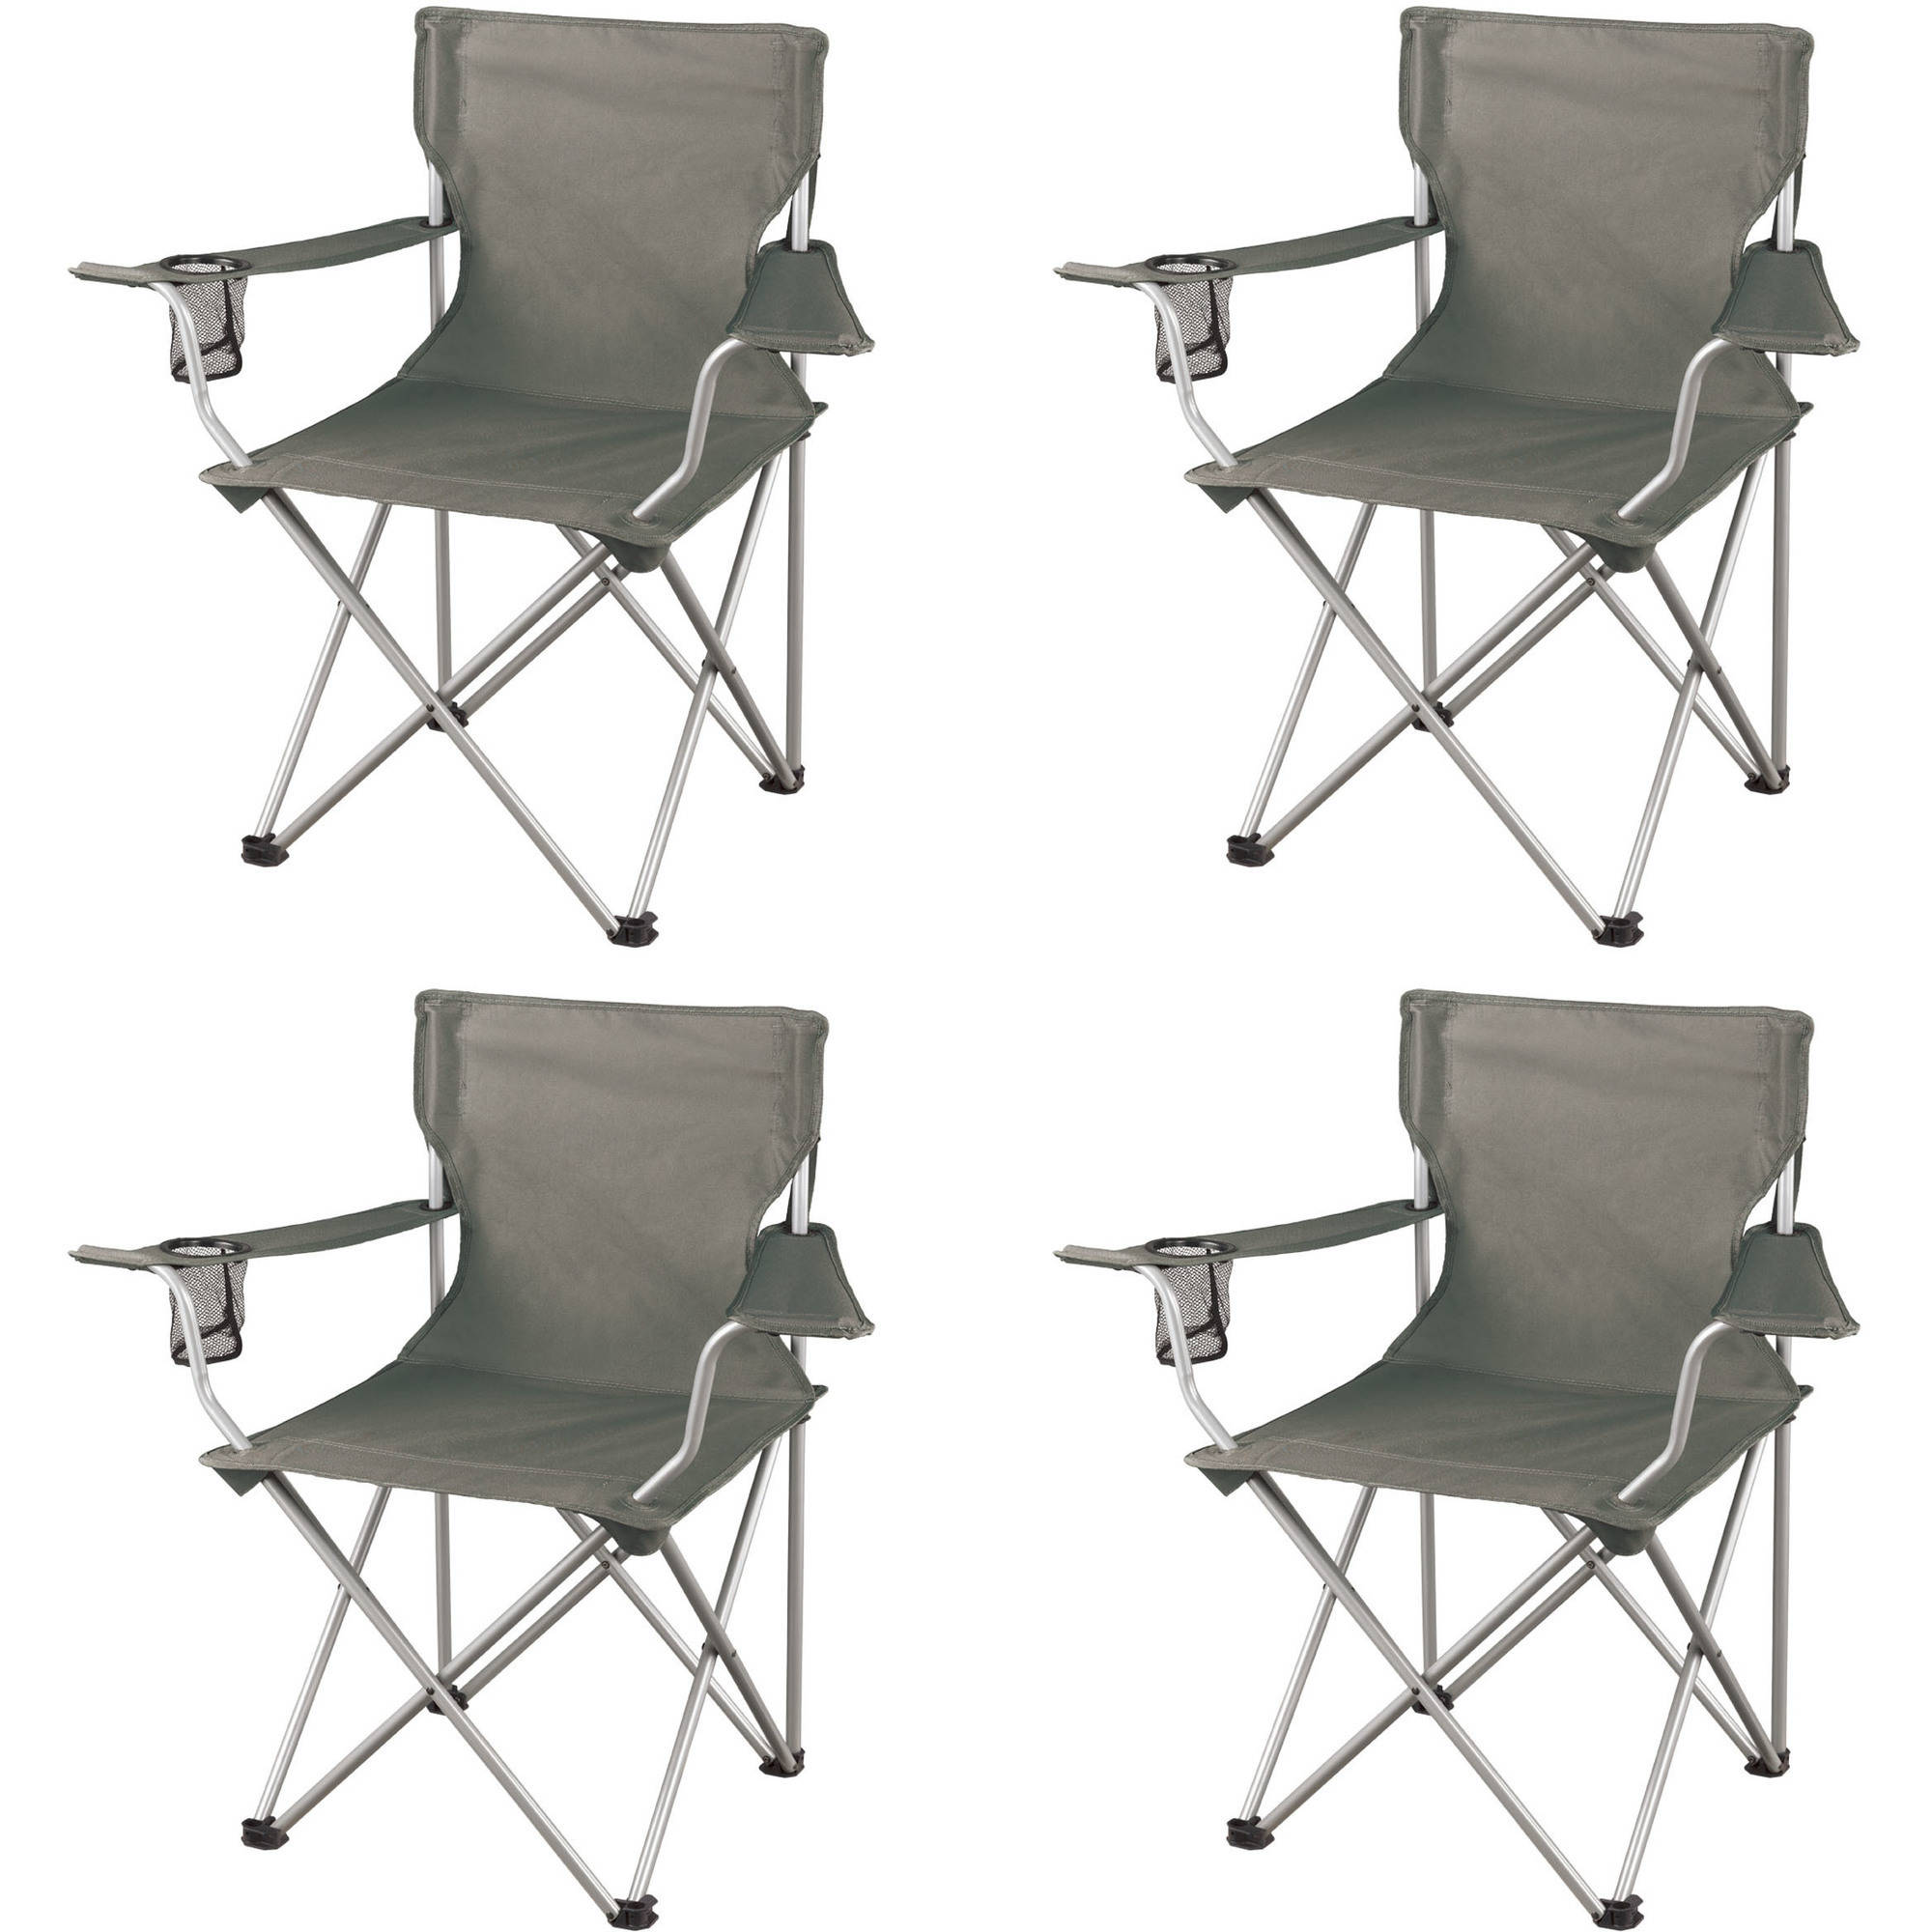 Ozark Trail Classic Folding Camp Chairs, with Mesh Cup Holder,Set of 4, 32.10 x 19.10 x 32.10 Inches - image 1 of 10